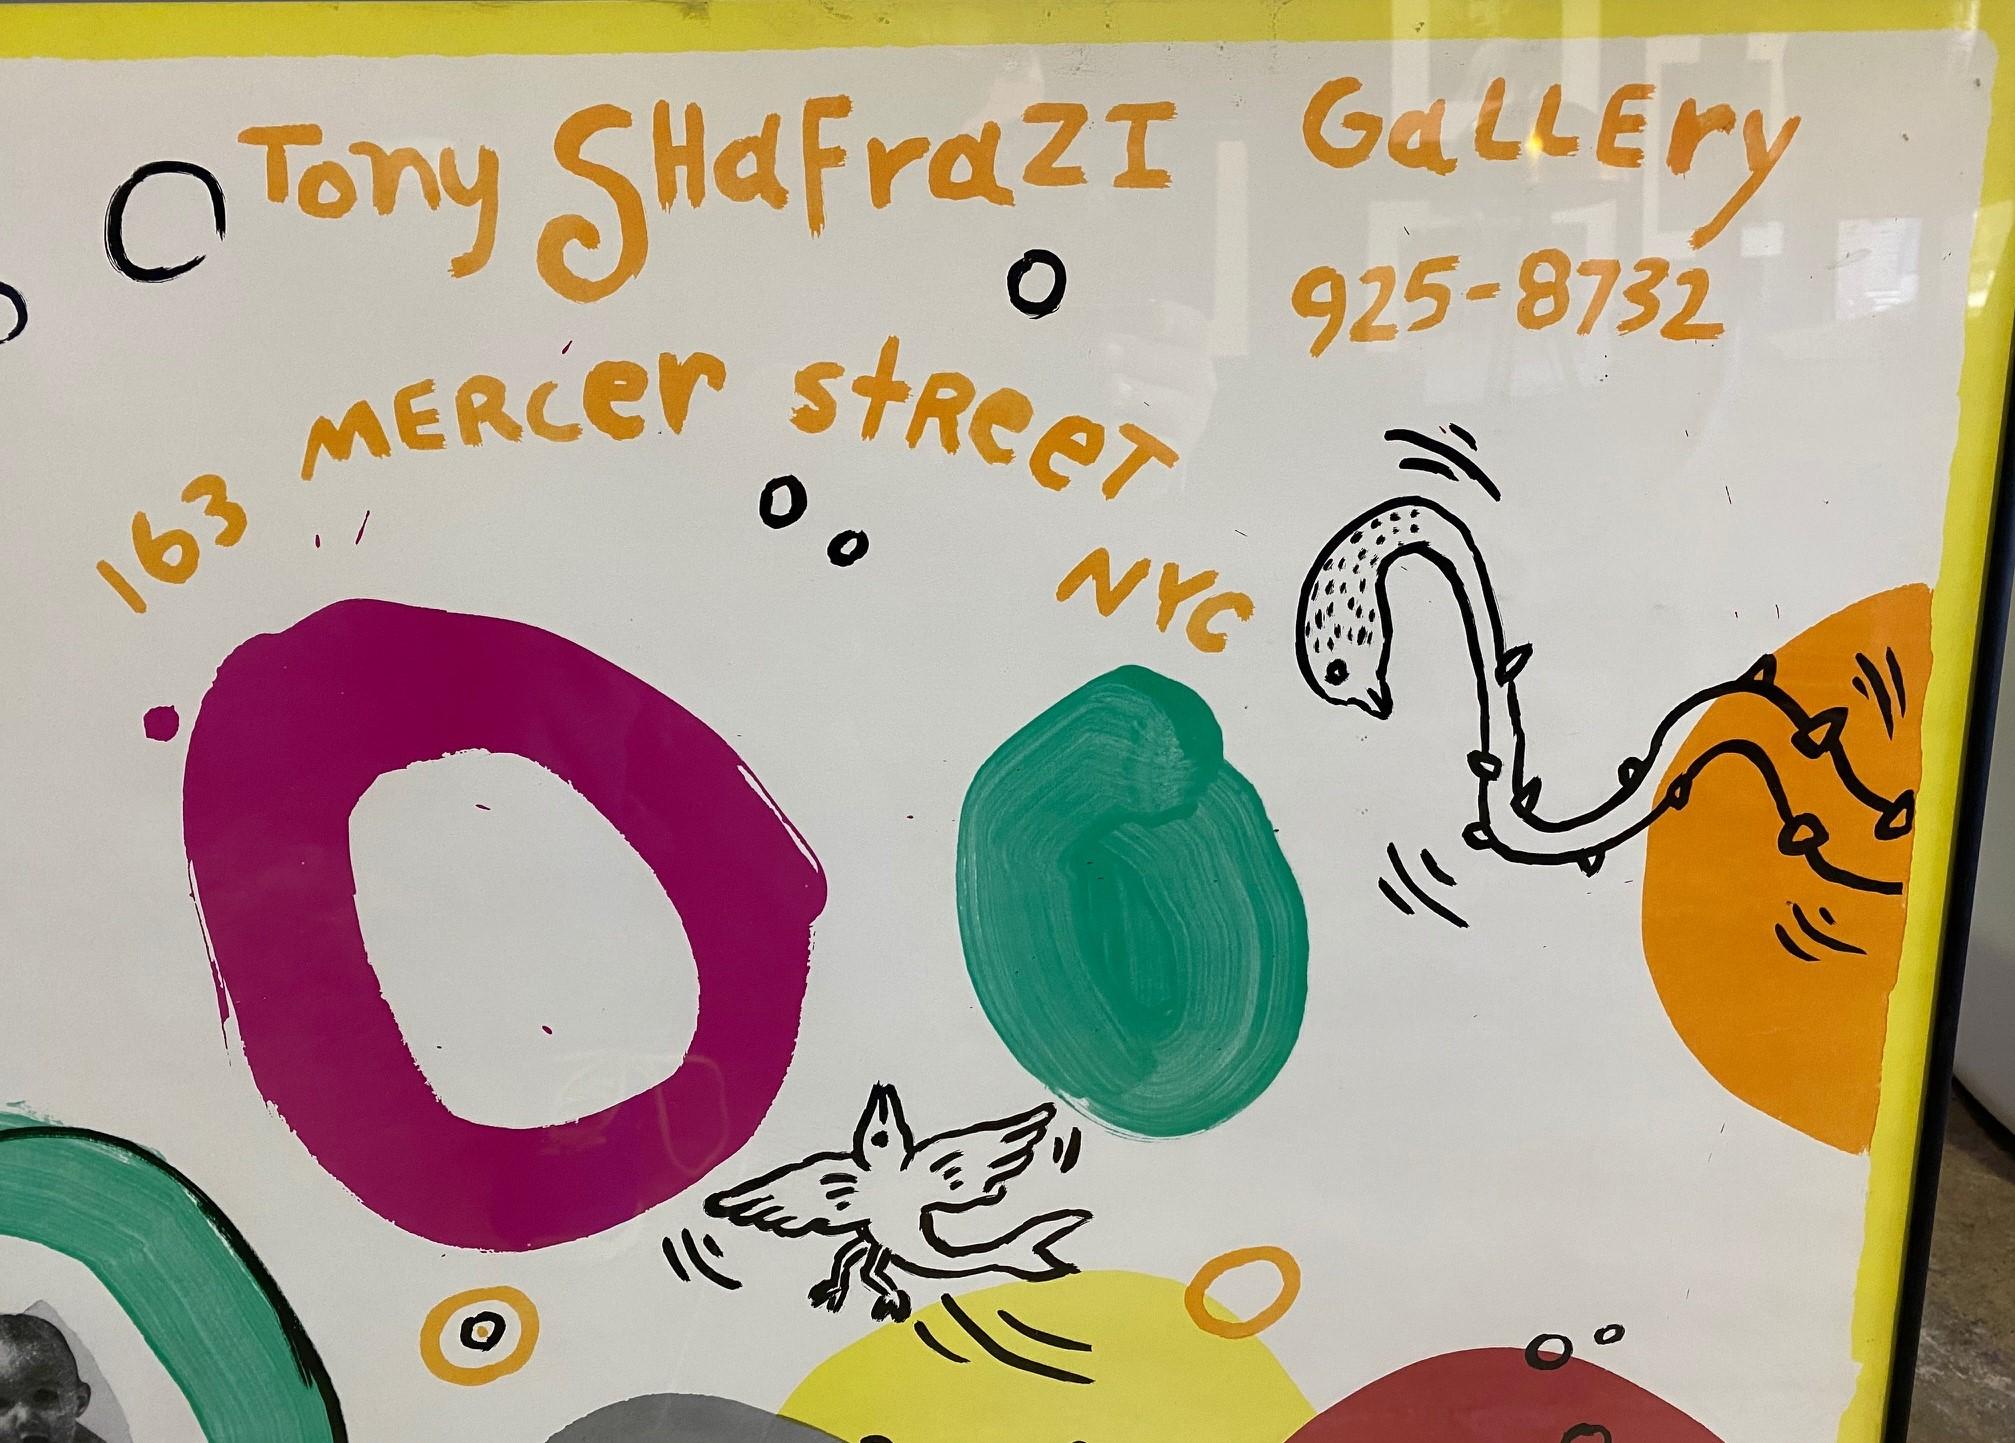 American Keith Haring Hand Signed Tony Shafrazi Exhibit Poster with Original Drawing 1989